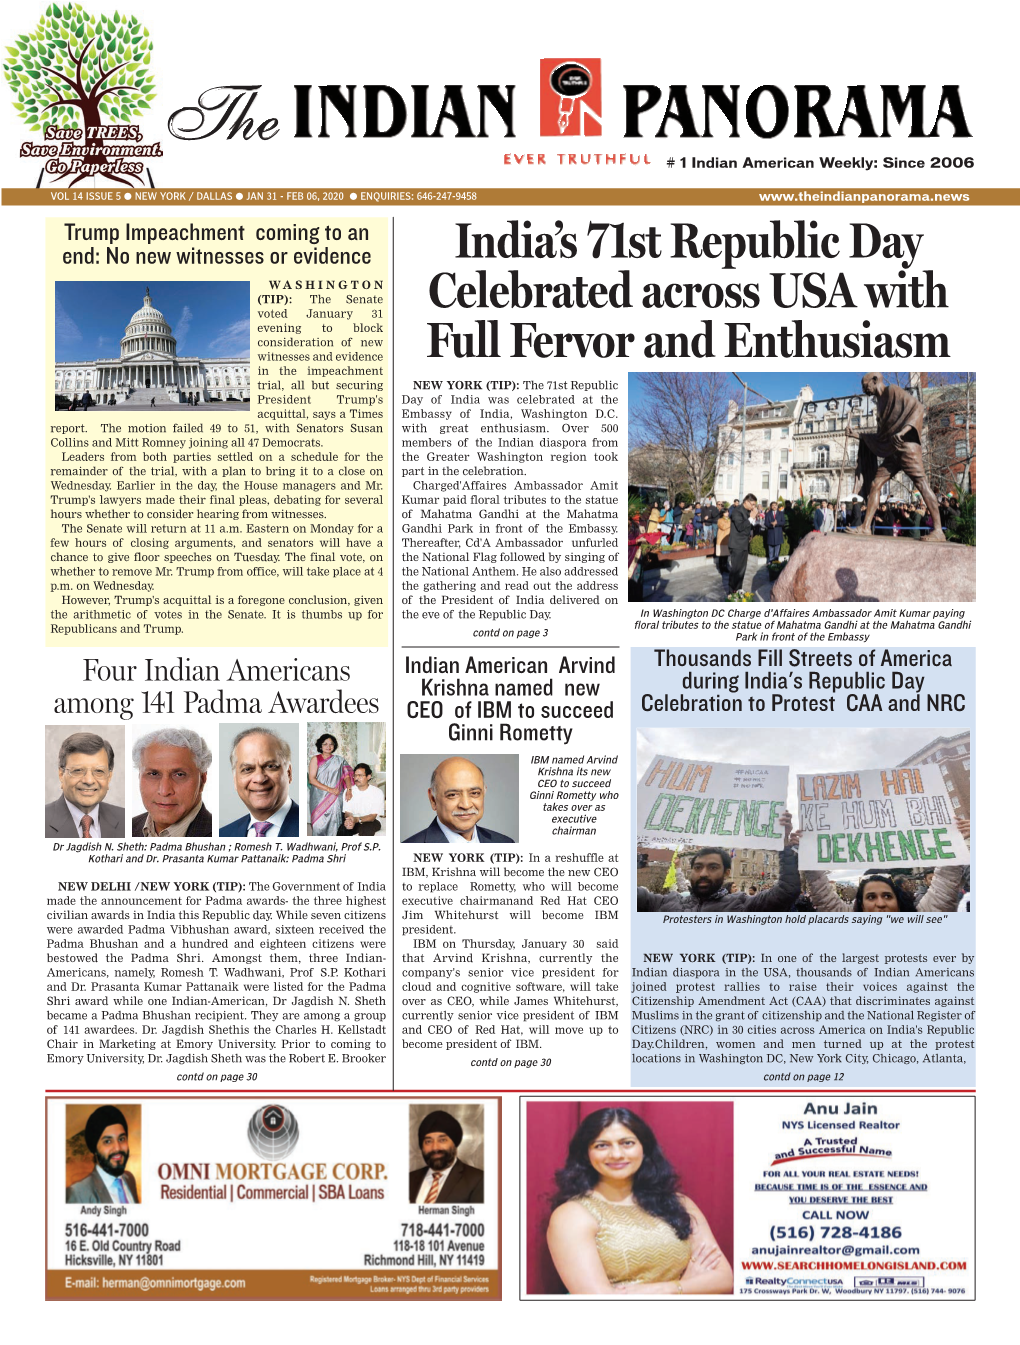 India's 71St Republic Day Celebrated Across USA with Full Fervor and Enthusiasm